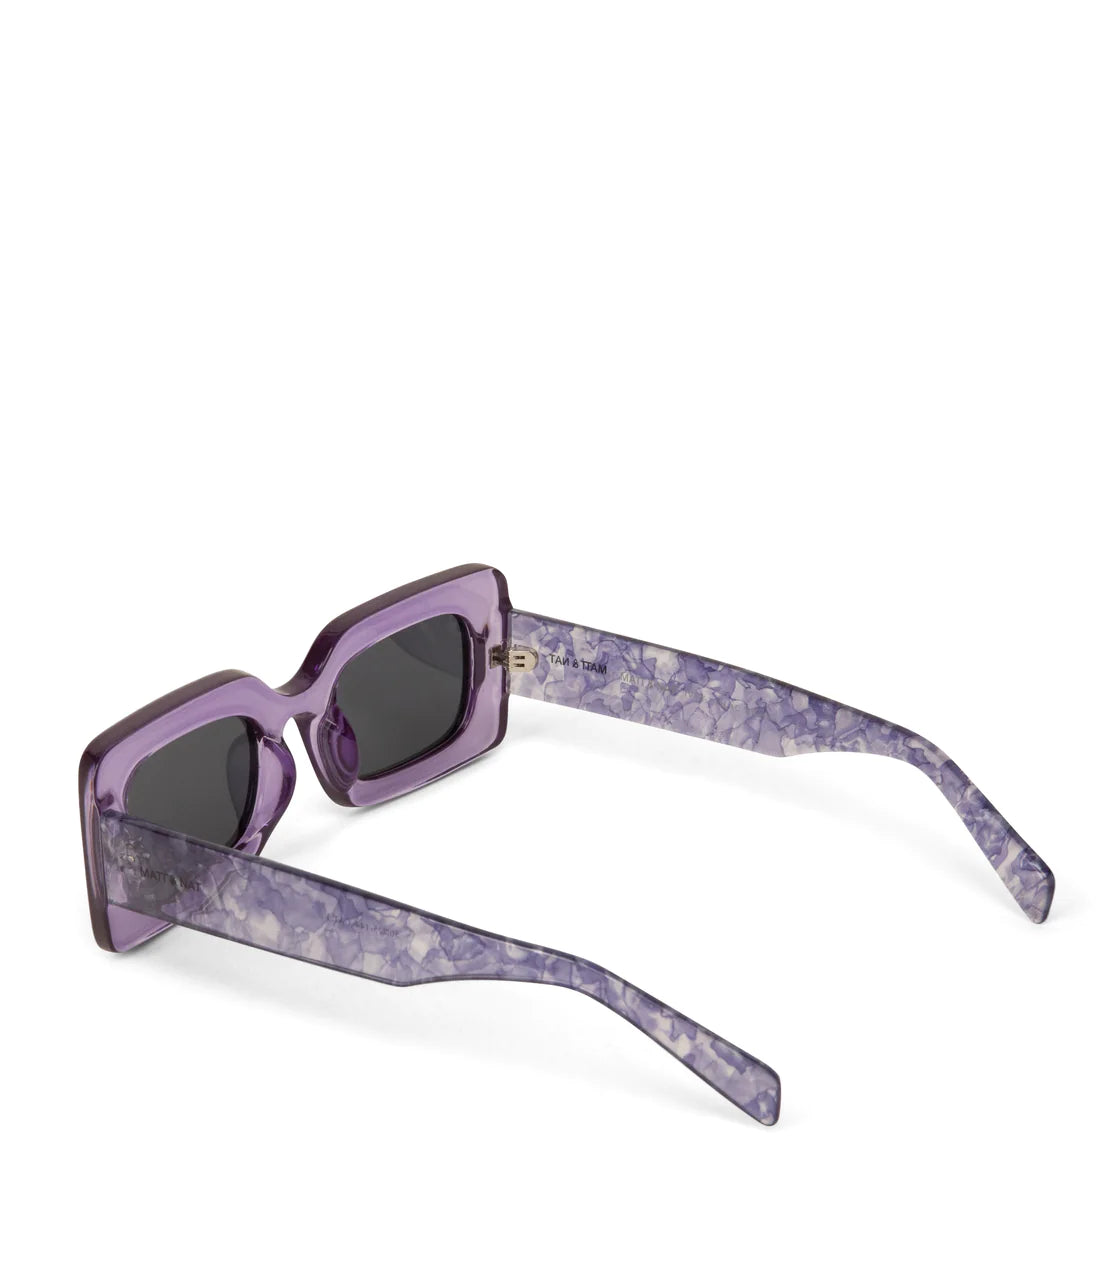 Ivvy2 Sunglasses in Lilac Clear